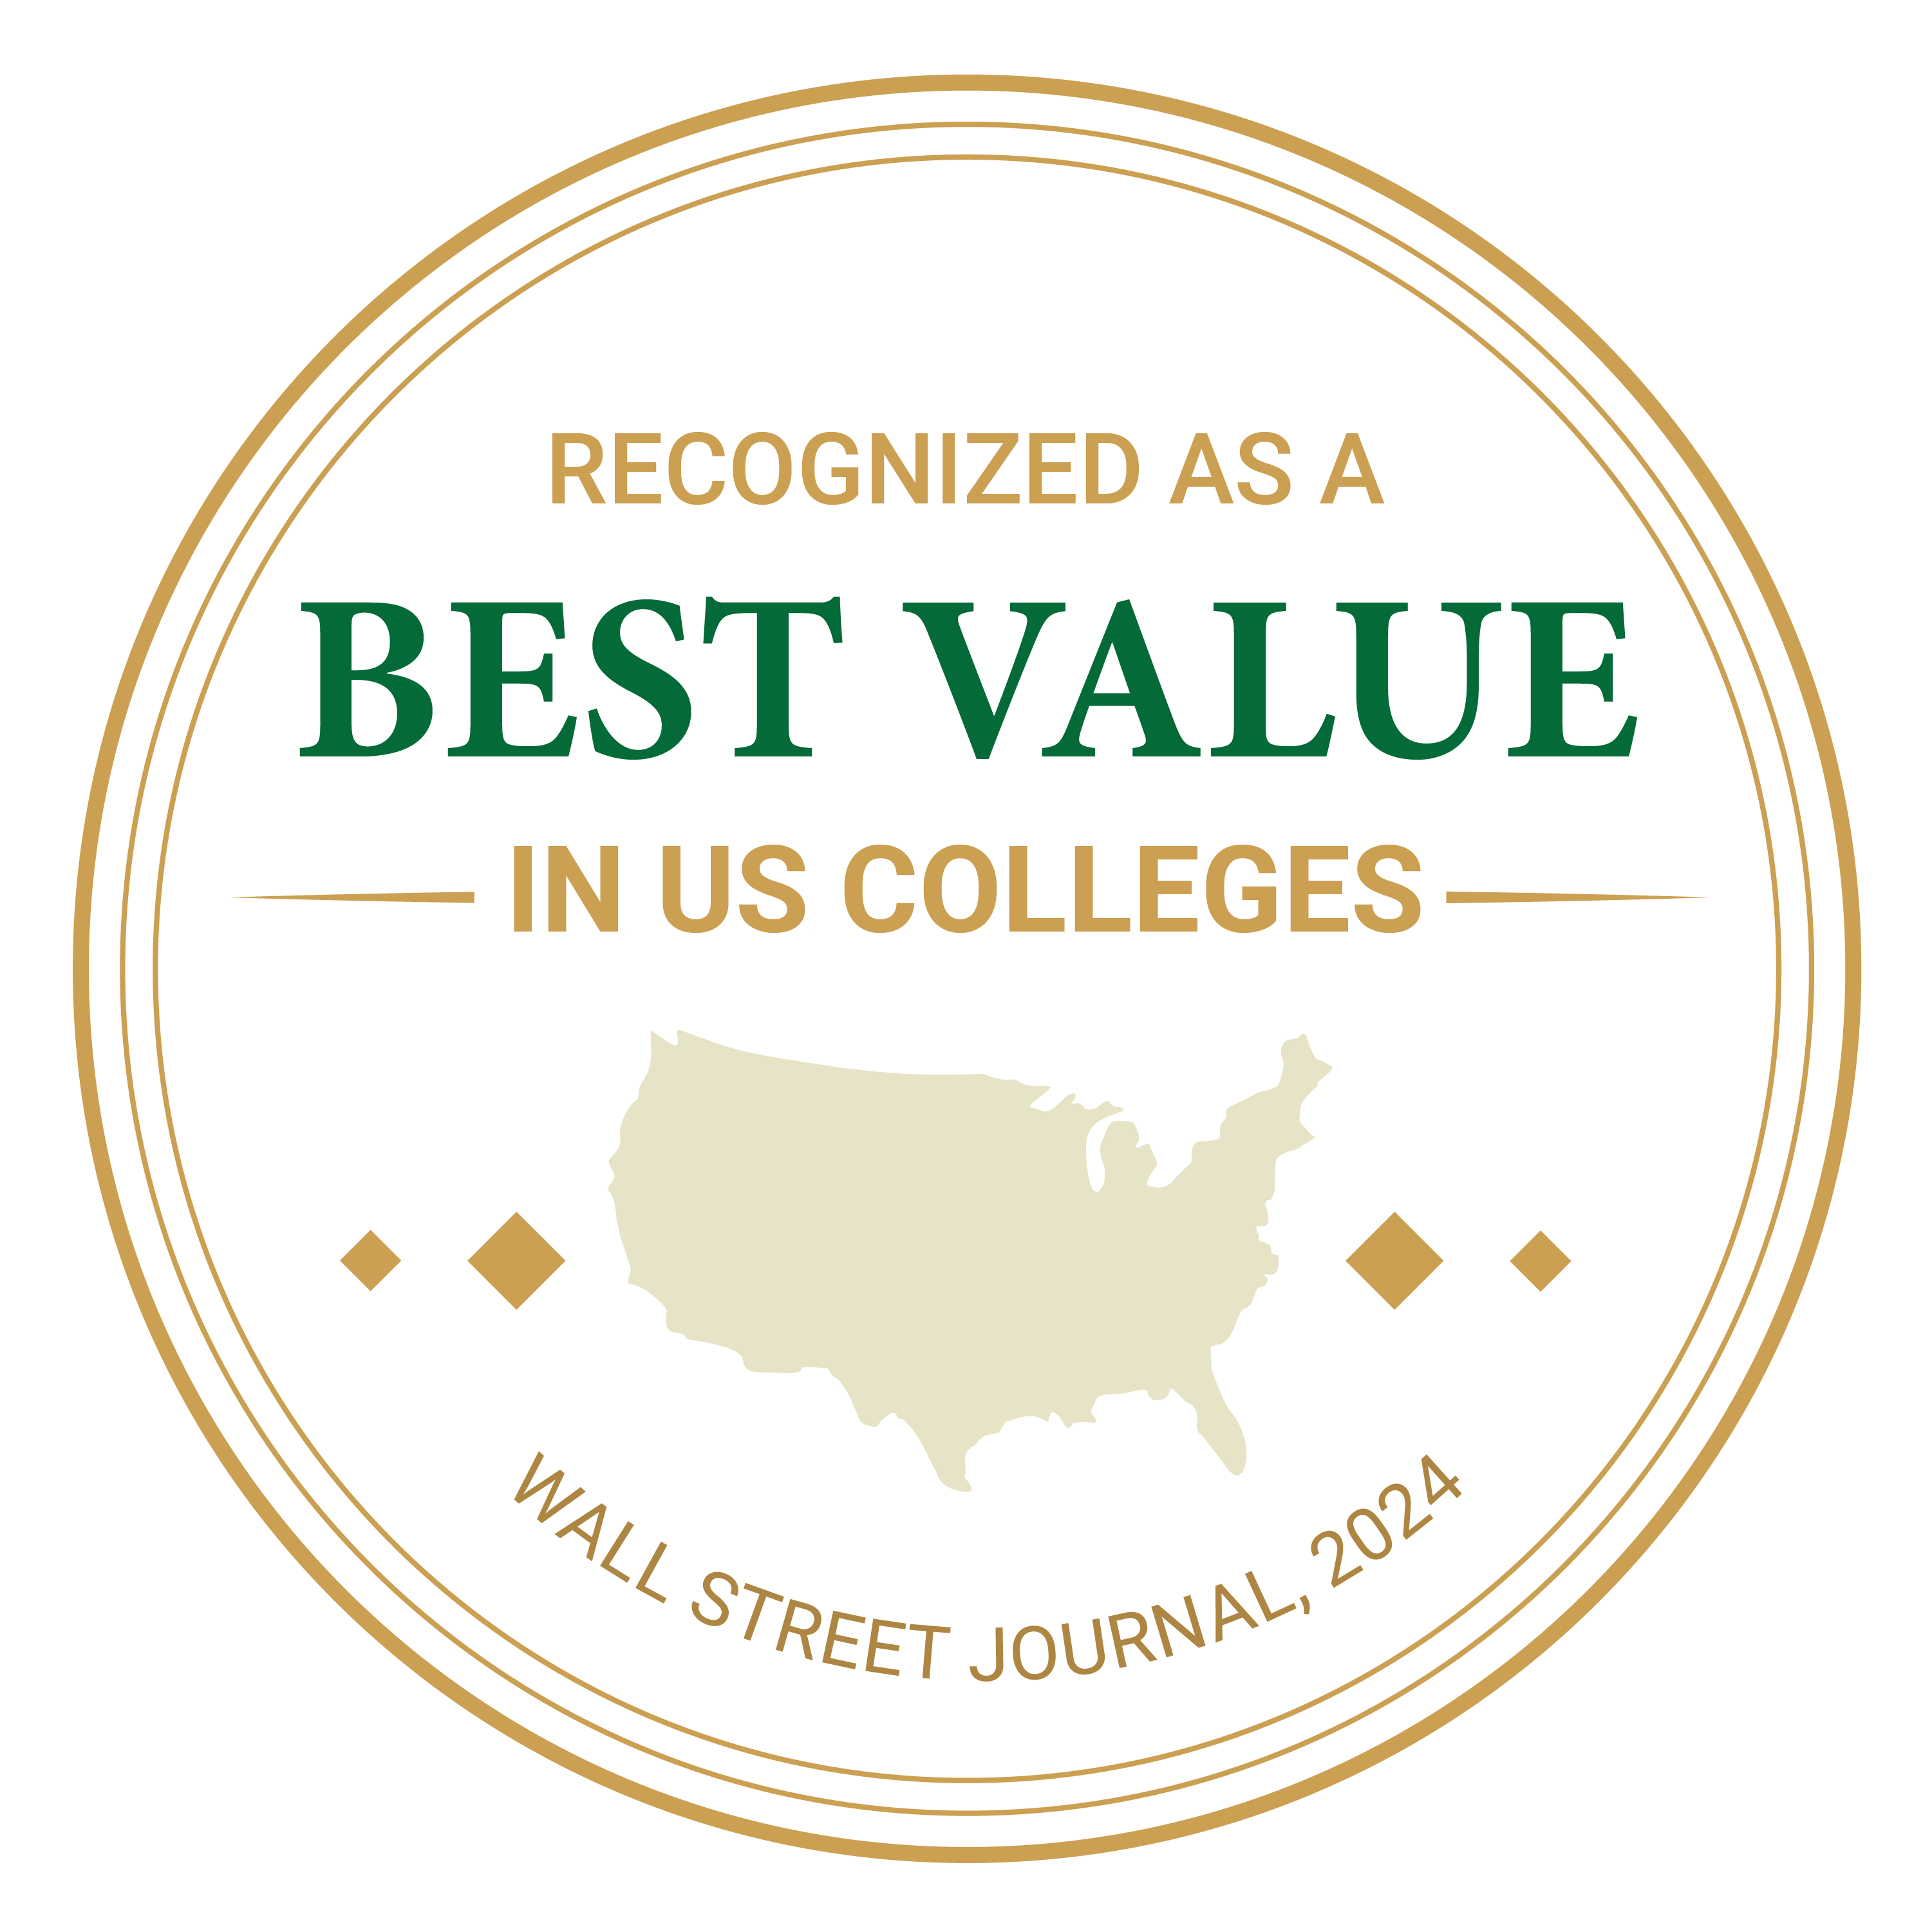 Wright State University one of americas best colleges ranked by the wall street journal